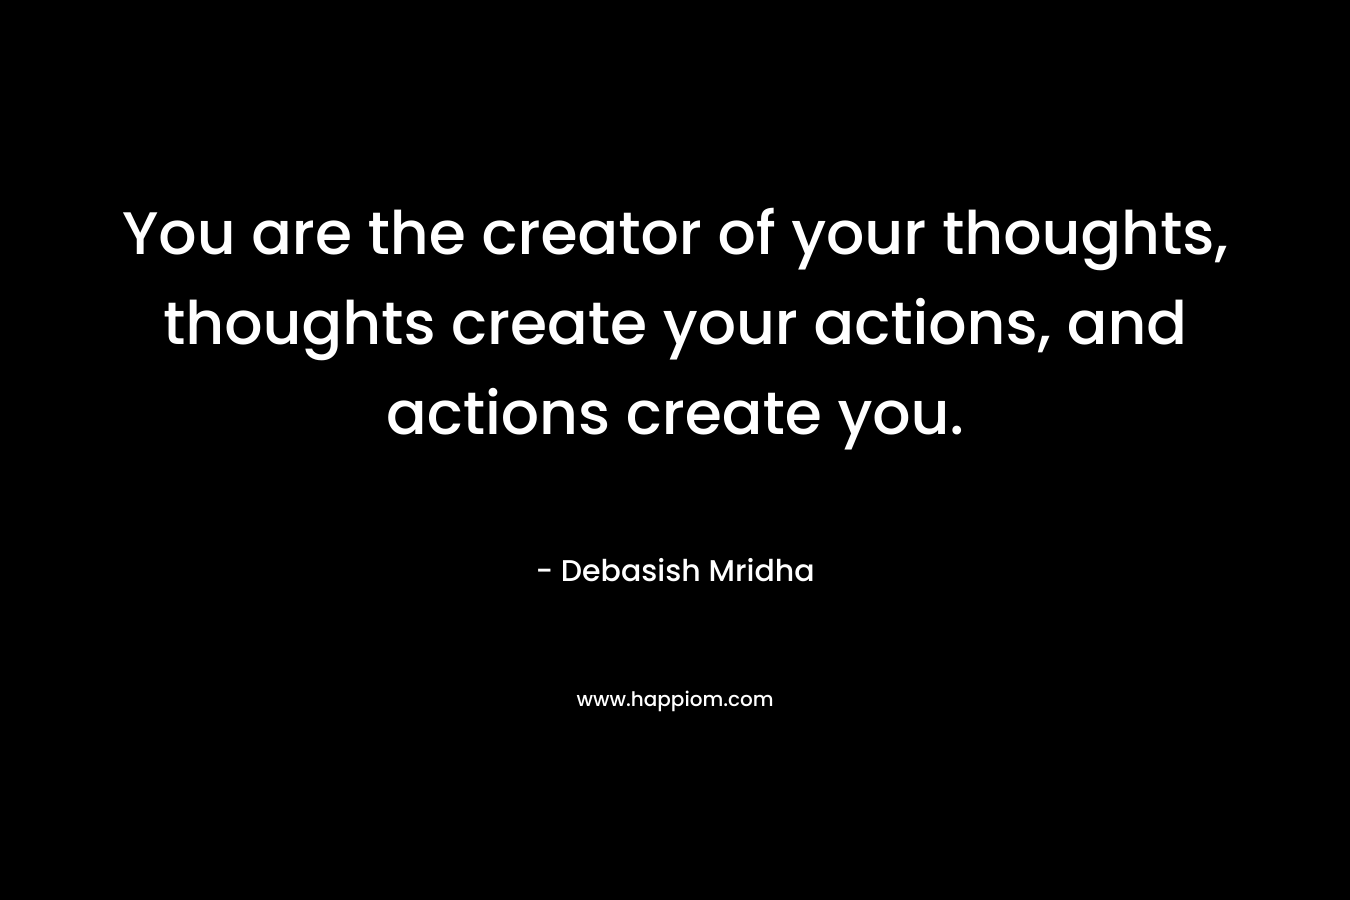 You are the creator of your thoughts, thoughts create your actions, and actions create you.